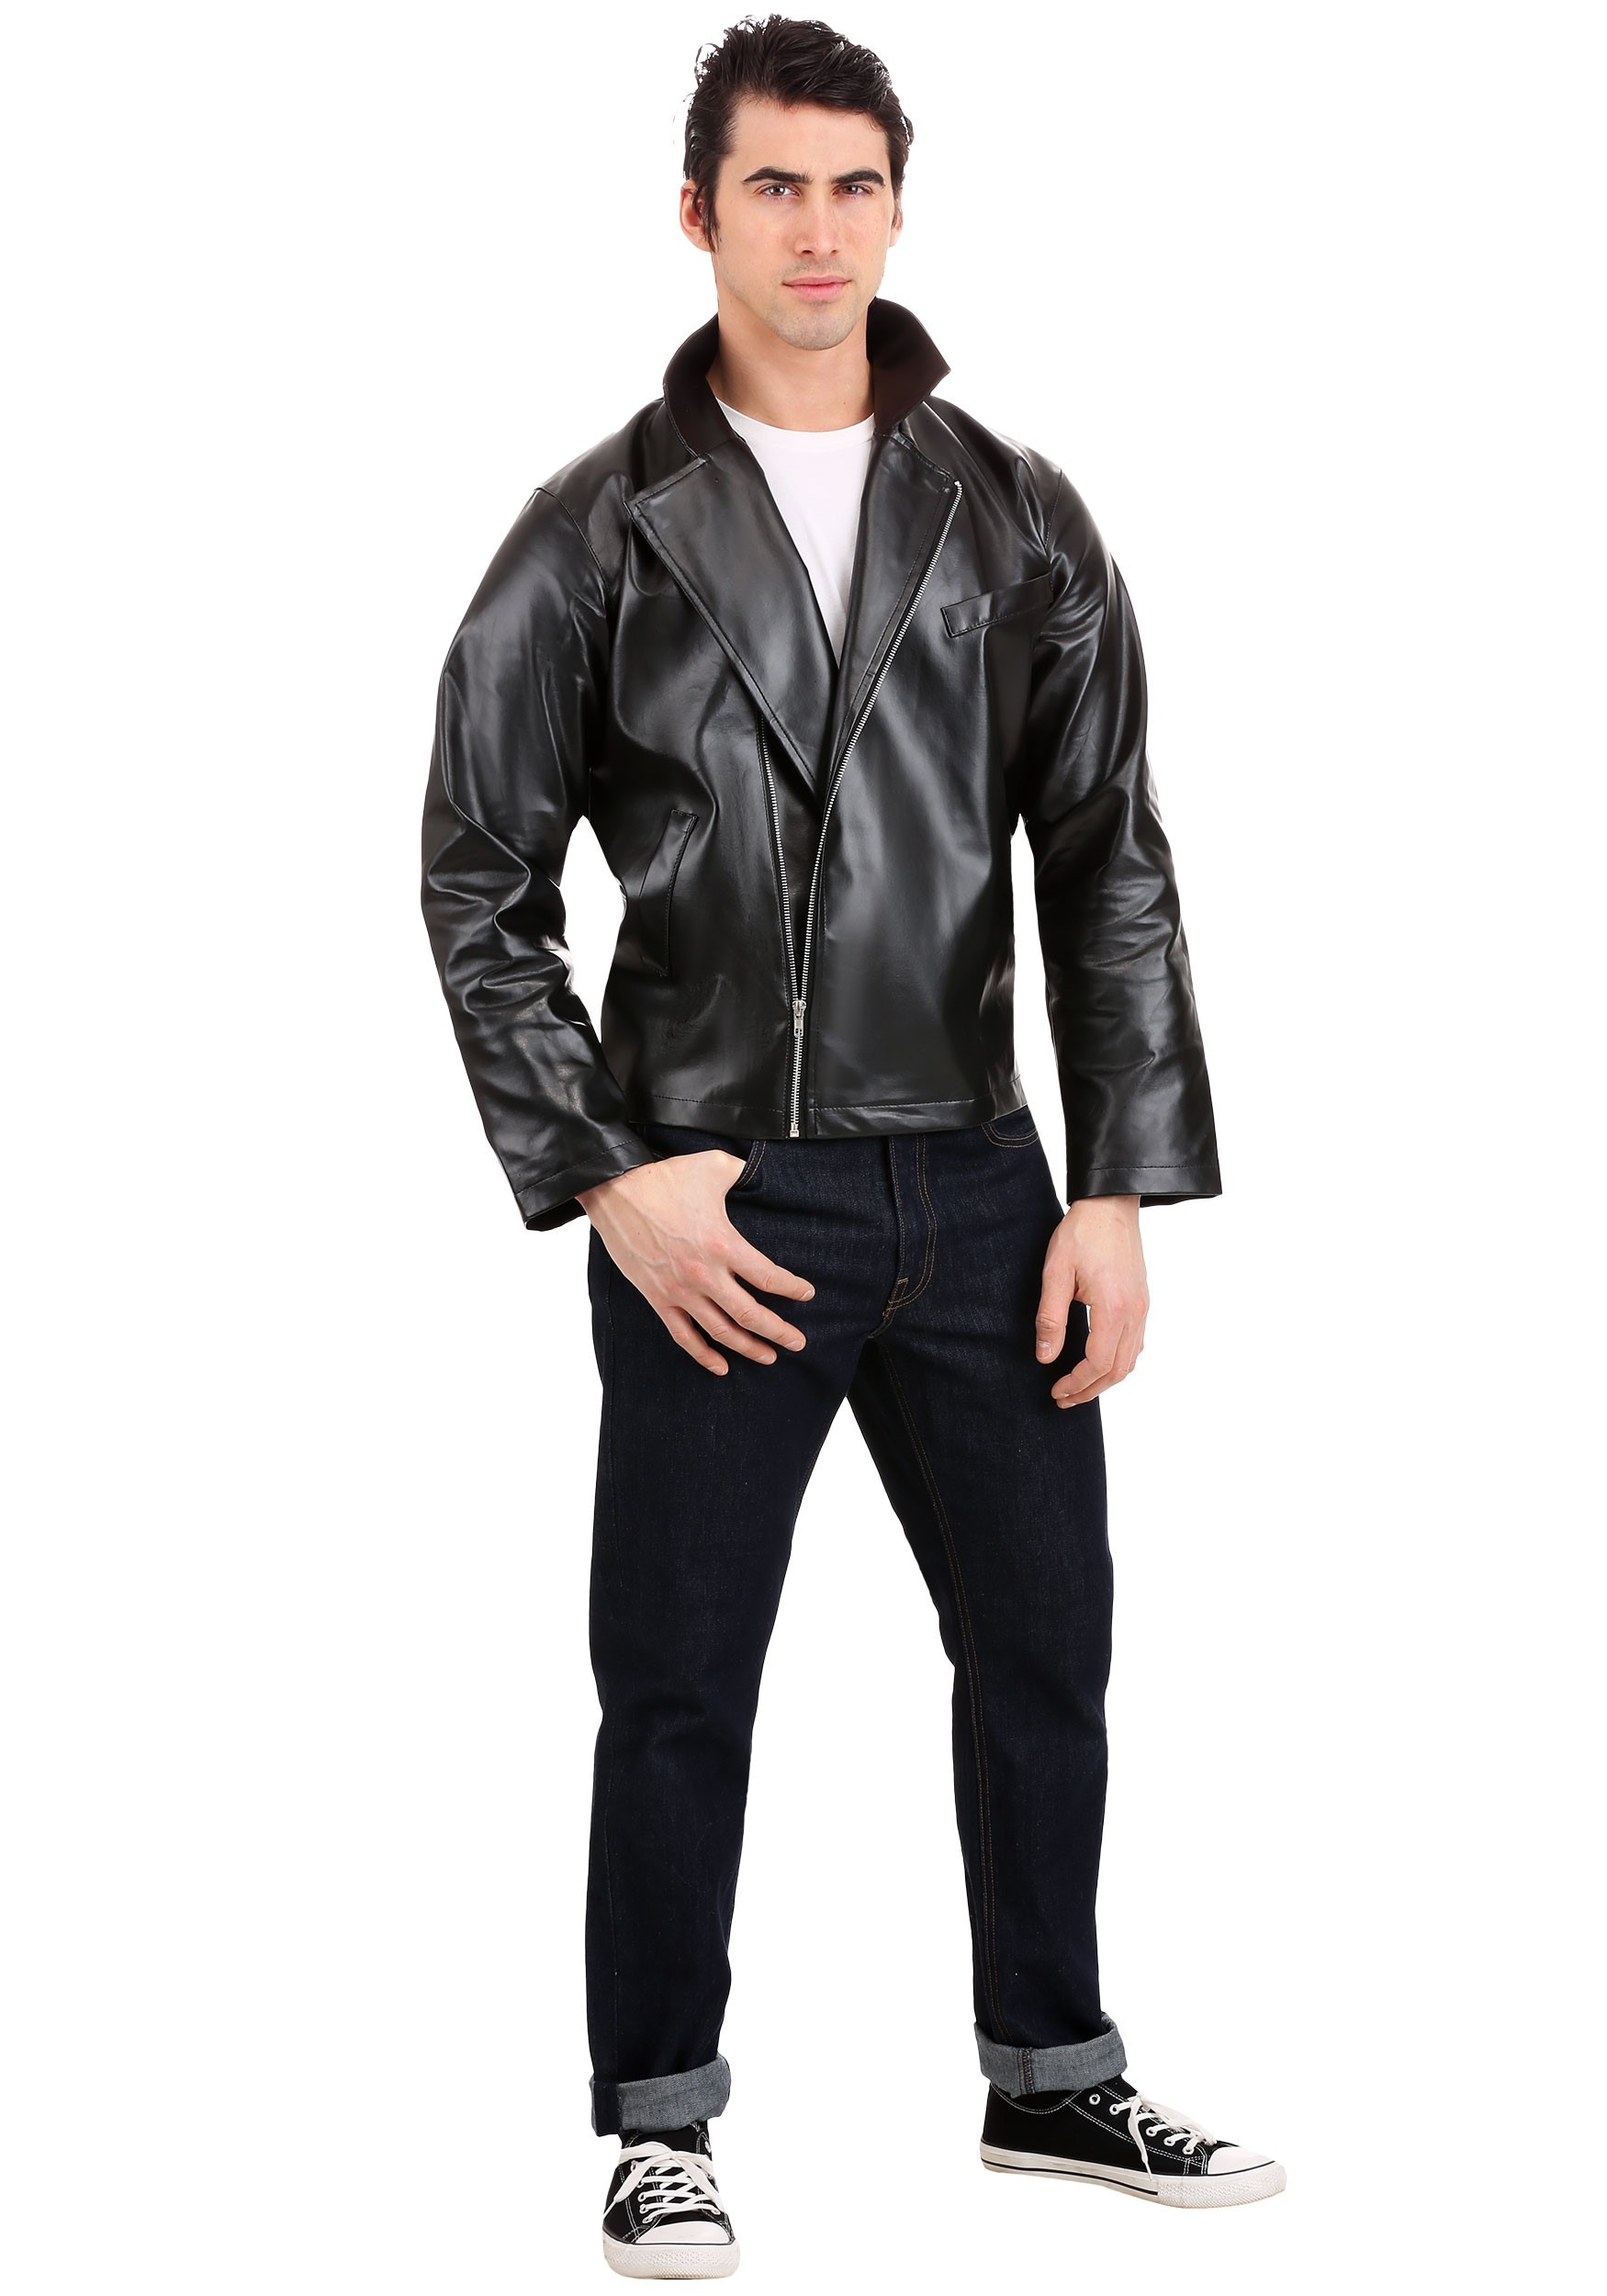 Grease T-Birds Jacket Costume for Adults